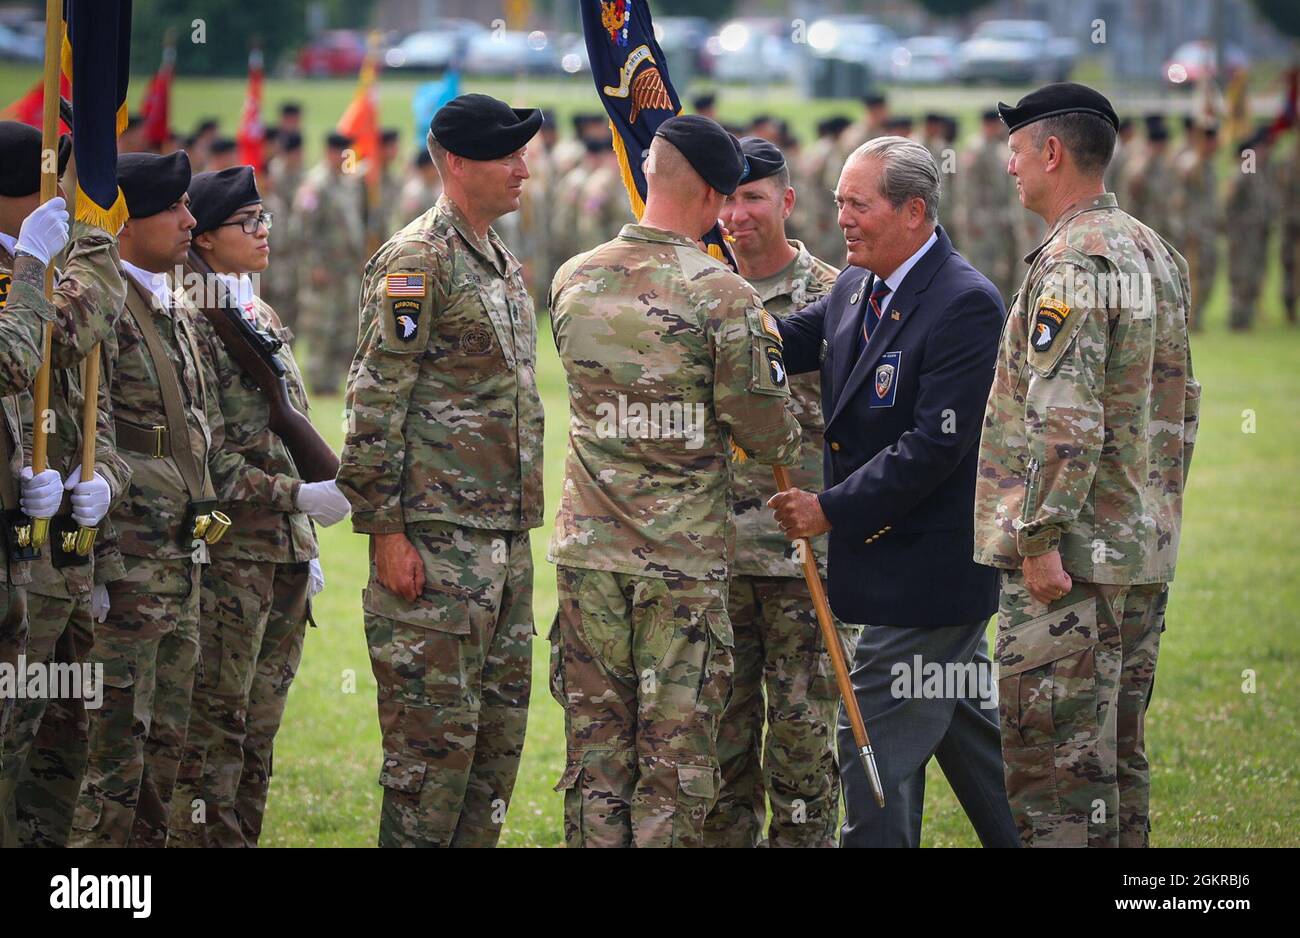 Col. Mark Federovich, incoming commander of the 3rd Brigade Combat Team, 101st Airborne Division (Air Assault), receives the regimental colours from Command Sgt. Maj. (Retired) Gerald Counts, the Honorary Colonel of the 187th Infantry Regiment, during a change of command ceremony on Fort Campbell, KY June 18, 2021.     The passing of the regimental colours symbolizes the continuation of the historic lineage of the 187th linking the Soldiers of yesterday to those serving today. Stock Photo